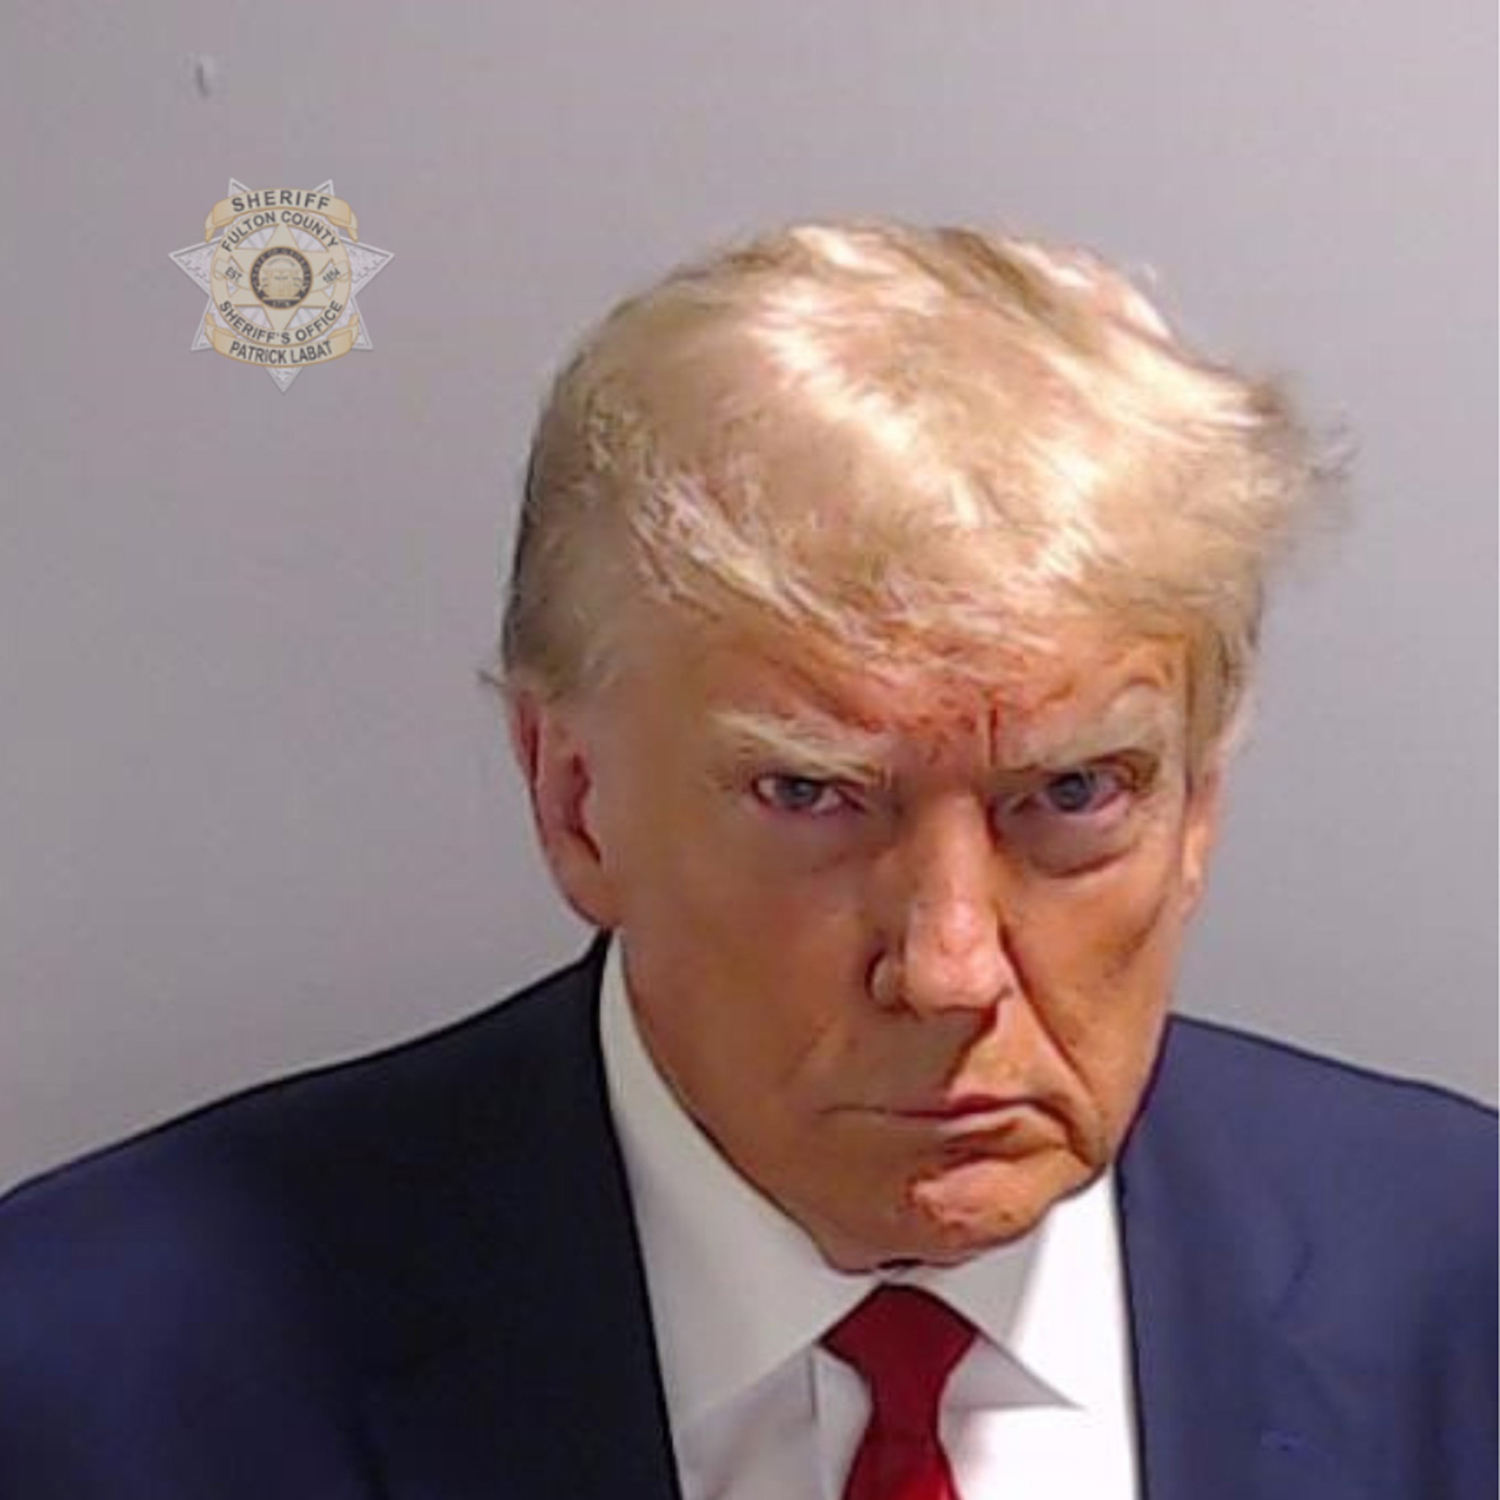 ATLANTA, GEORGIA - AUGUST 24: In this handout provided by the Fulton County Sheriff's Office, former U.S. President Donald Trump poses for his booking photo at the Fulton County Jail on August 24, 2023 in Atlanta, Georgia. Trump was booked on 13 charges related to an alleged plan to overturn the results of the 2020 presidential election in Georgia. Trump and 18 others facing felony charges have been ordered to turn themselves in to the Fulton County Jail by August 25. (Photo by Fulton County Sheriff's Office via Getty Images)